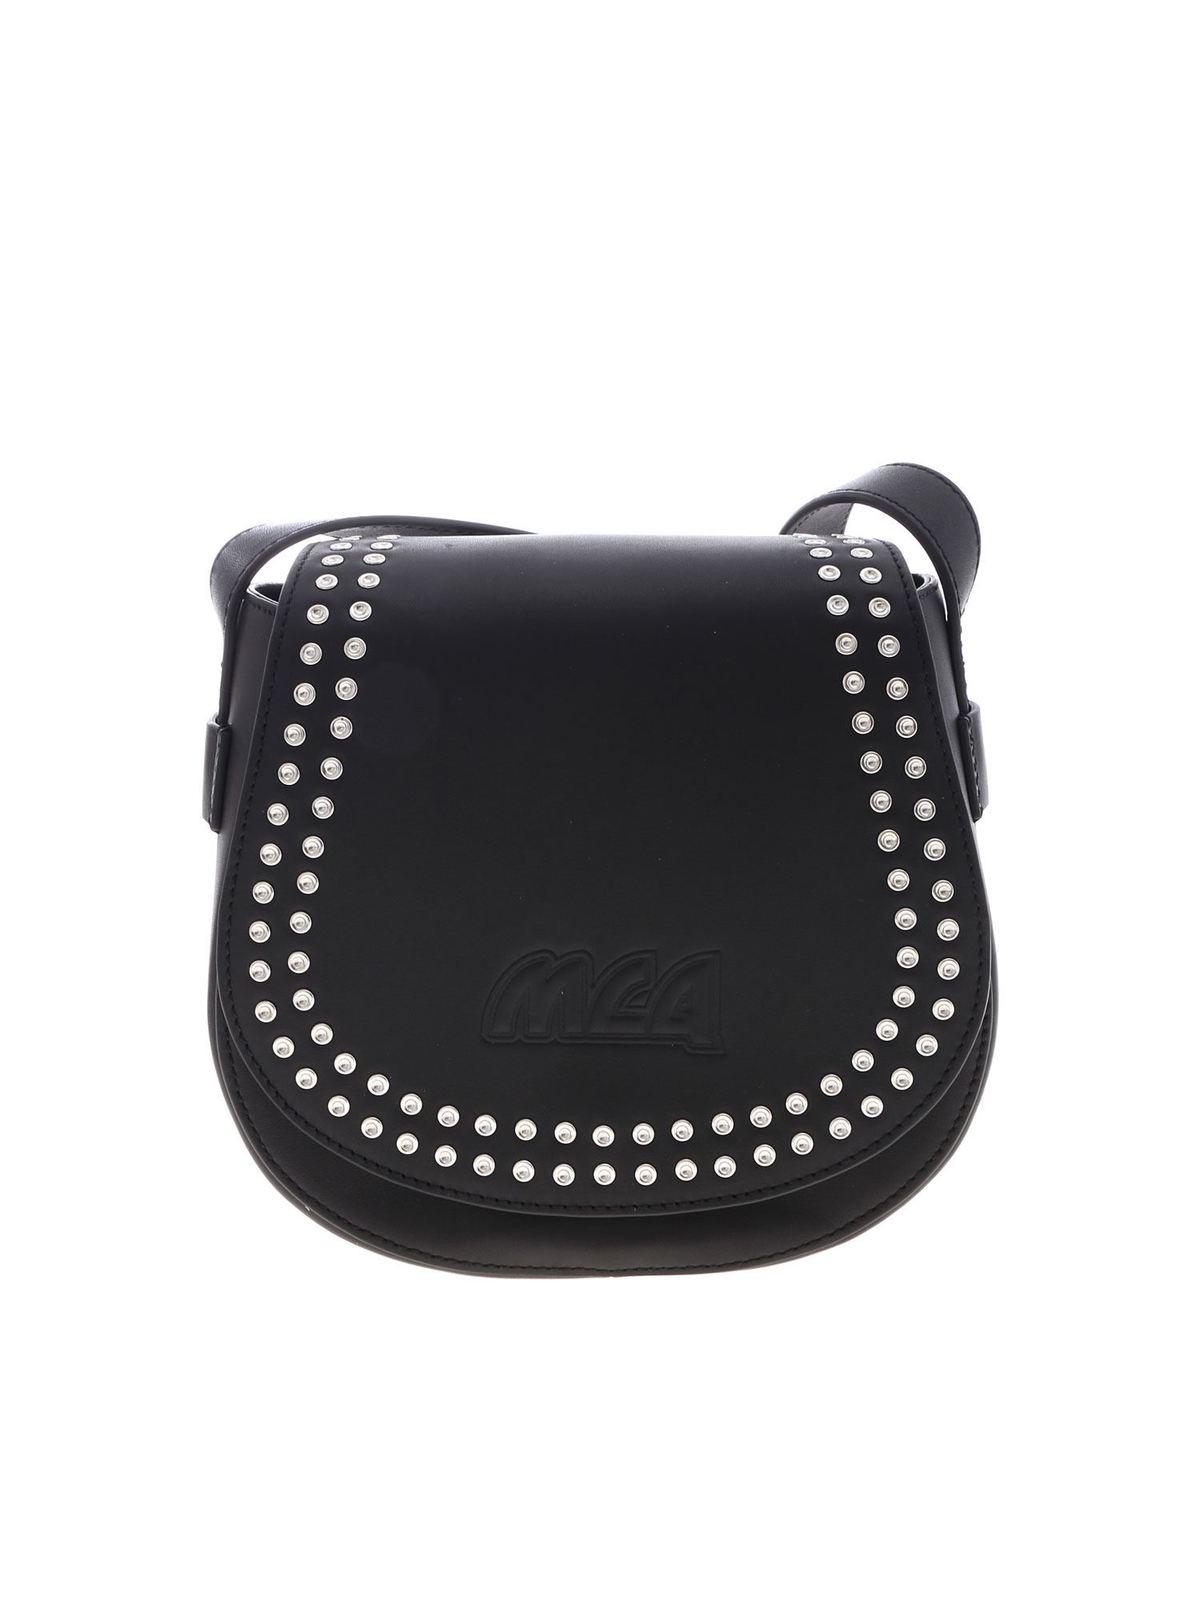 Mcq By Alexander Mcqueen Black Studded Leather Bag In Negro